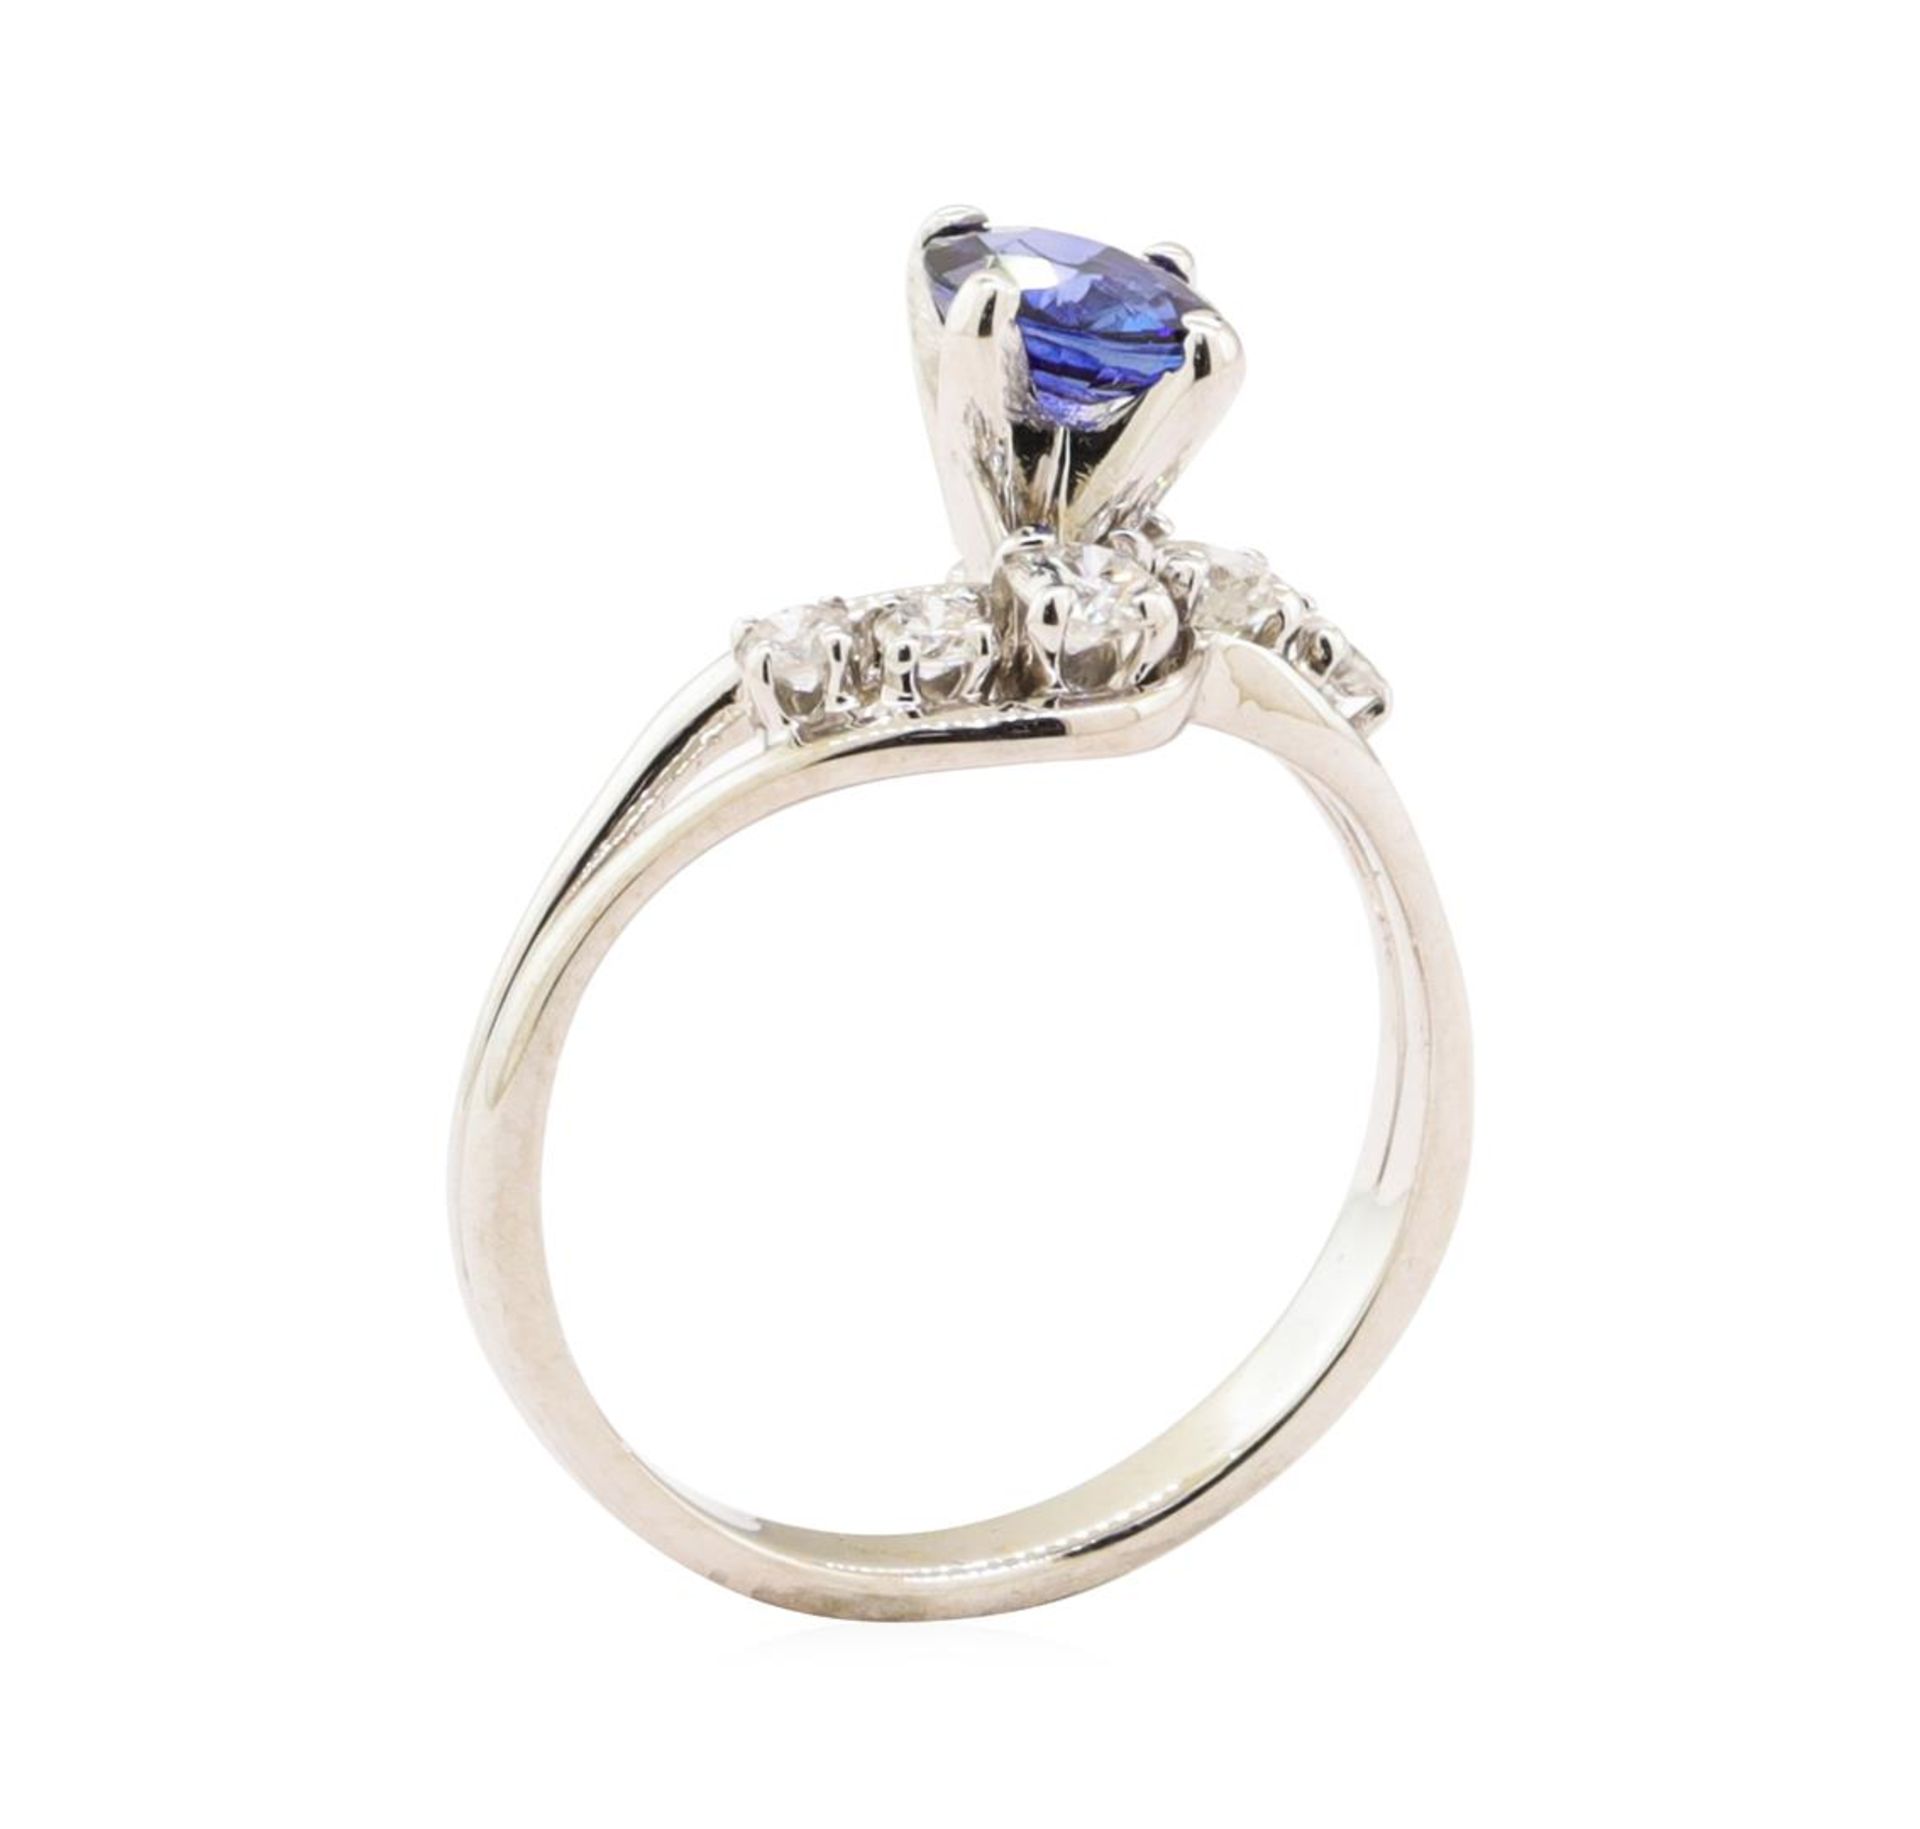 0.92ctw Blue Sapphire and Diamond Ring - 14KT White Gold - Image 4 of 4